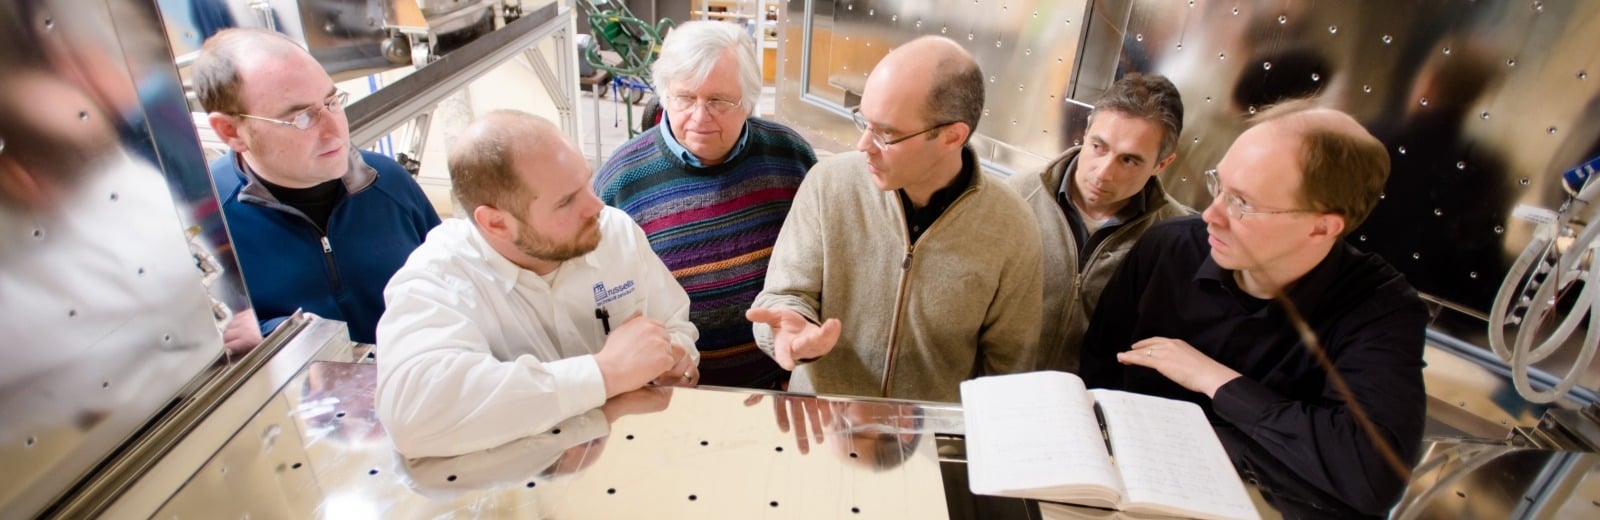 Six researchers discuss inside the Cloud Chamber lab